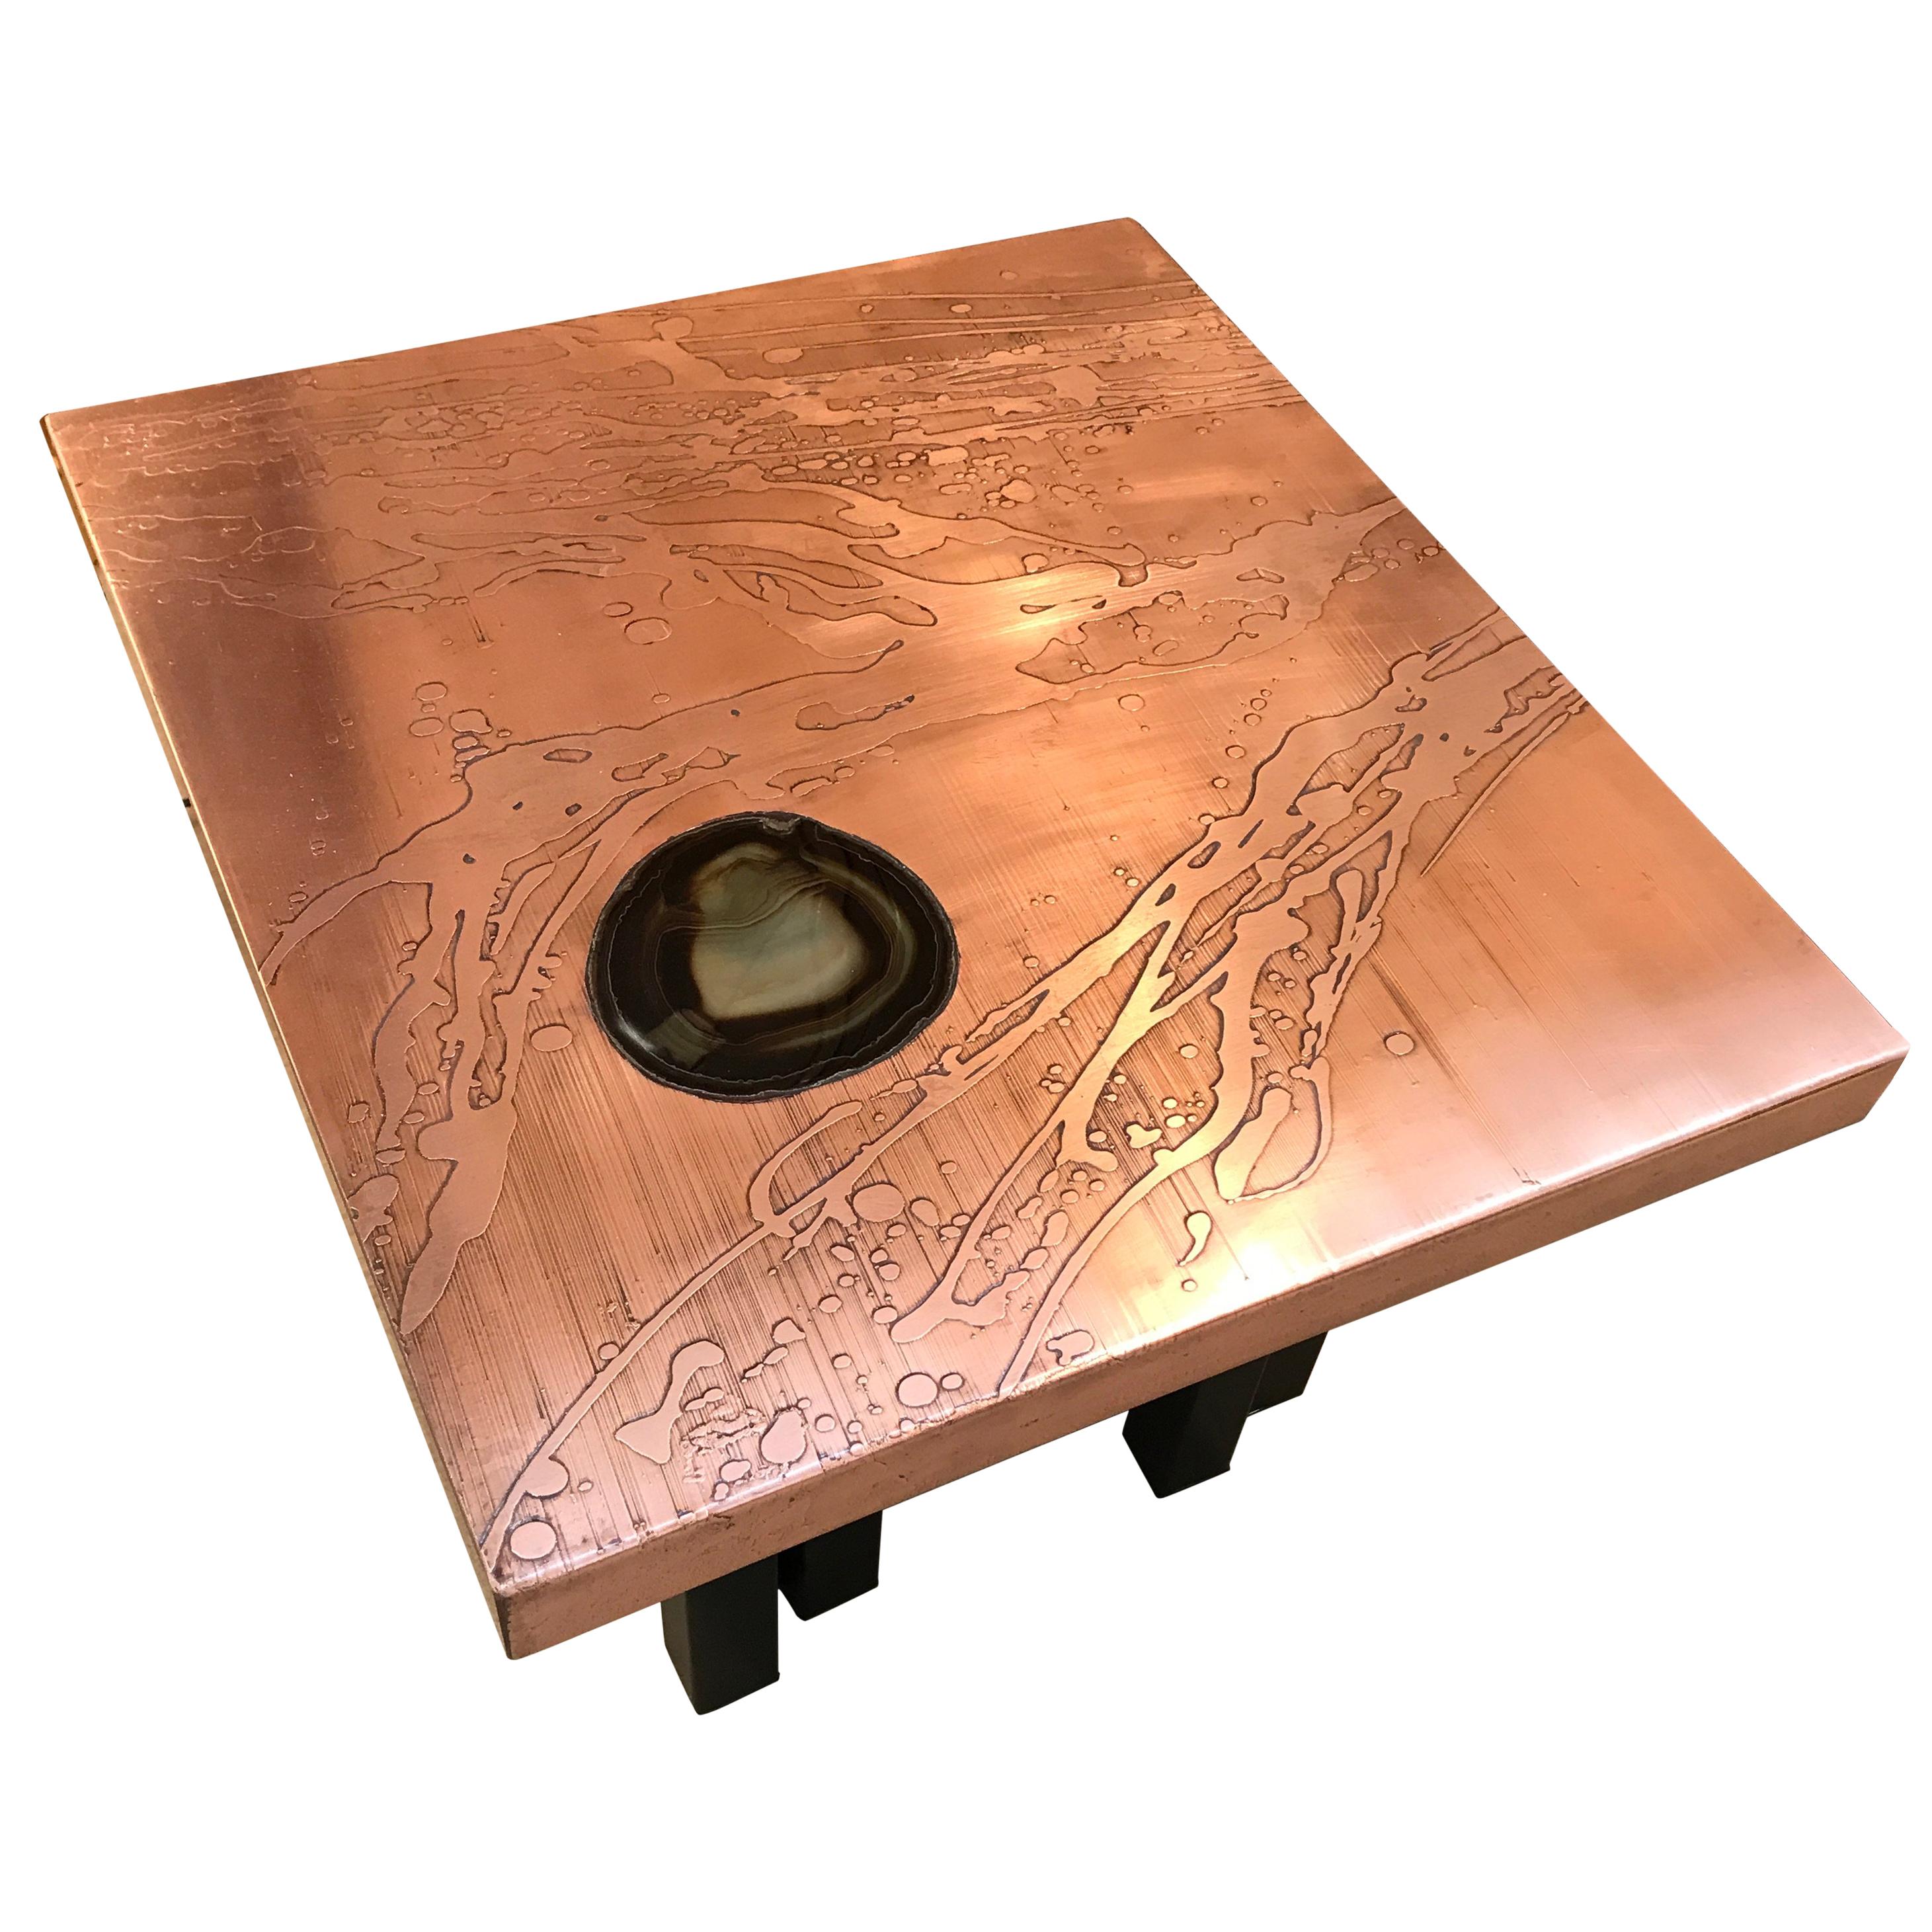 Rare Pair of Polished Acid Etched Copper End Tables by Lova Creation For Sale